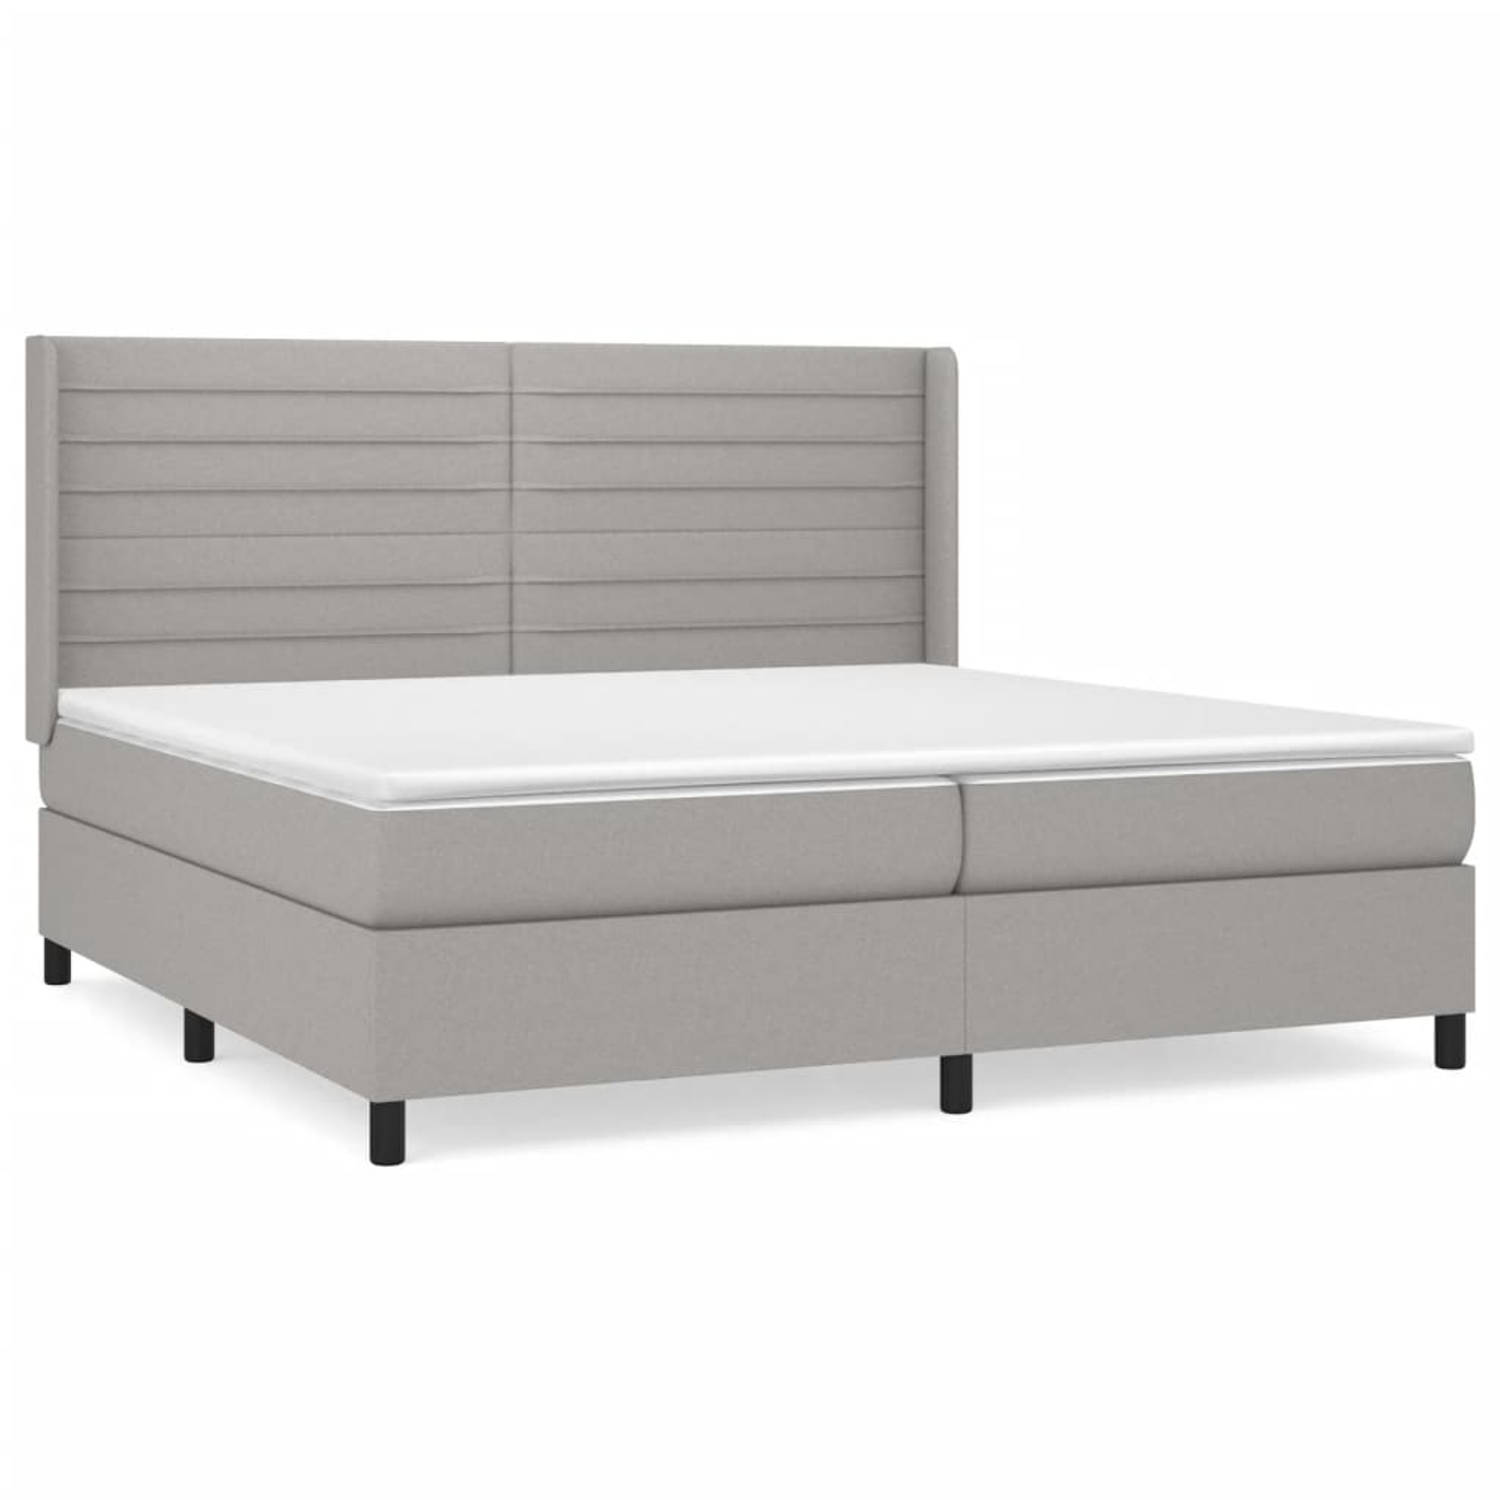 The Living Store Boxspringbed - The Living Store - Bed - 203 x 203 x 118/128 cm - Lichtgrijs